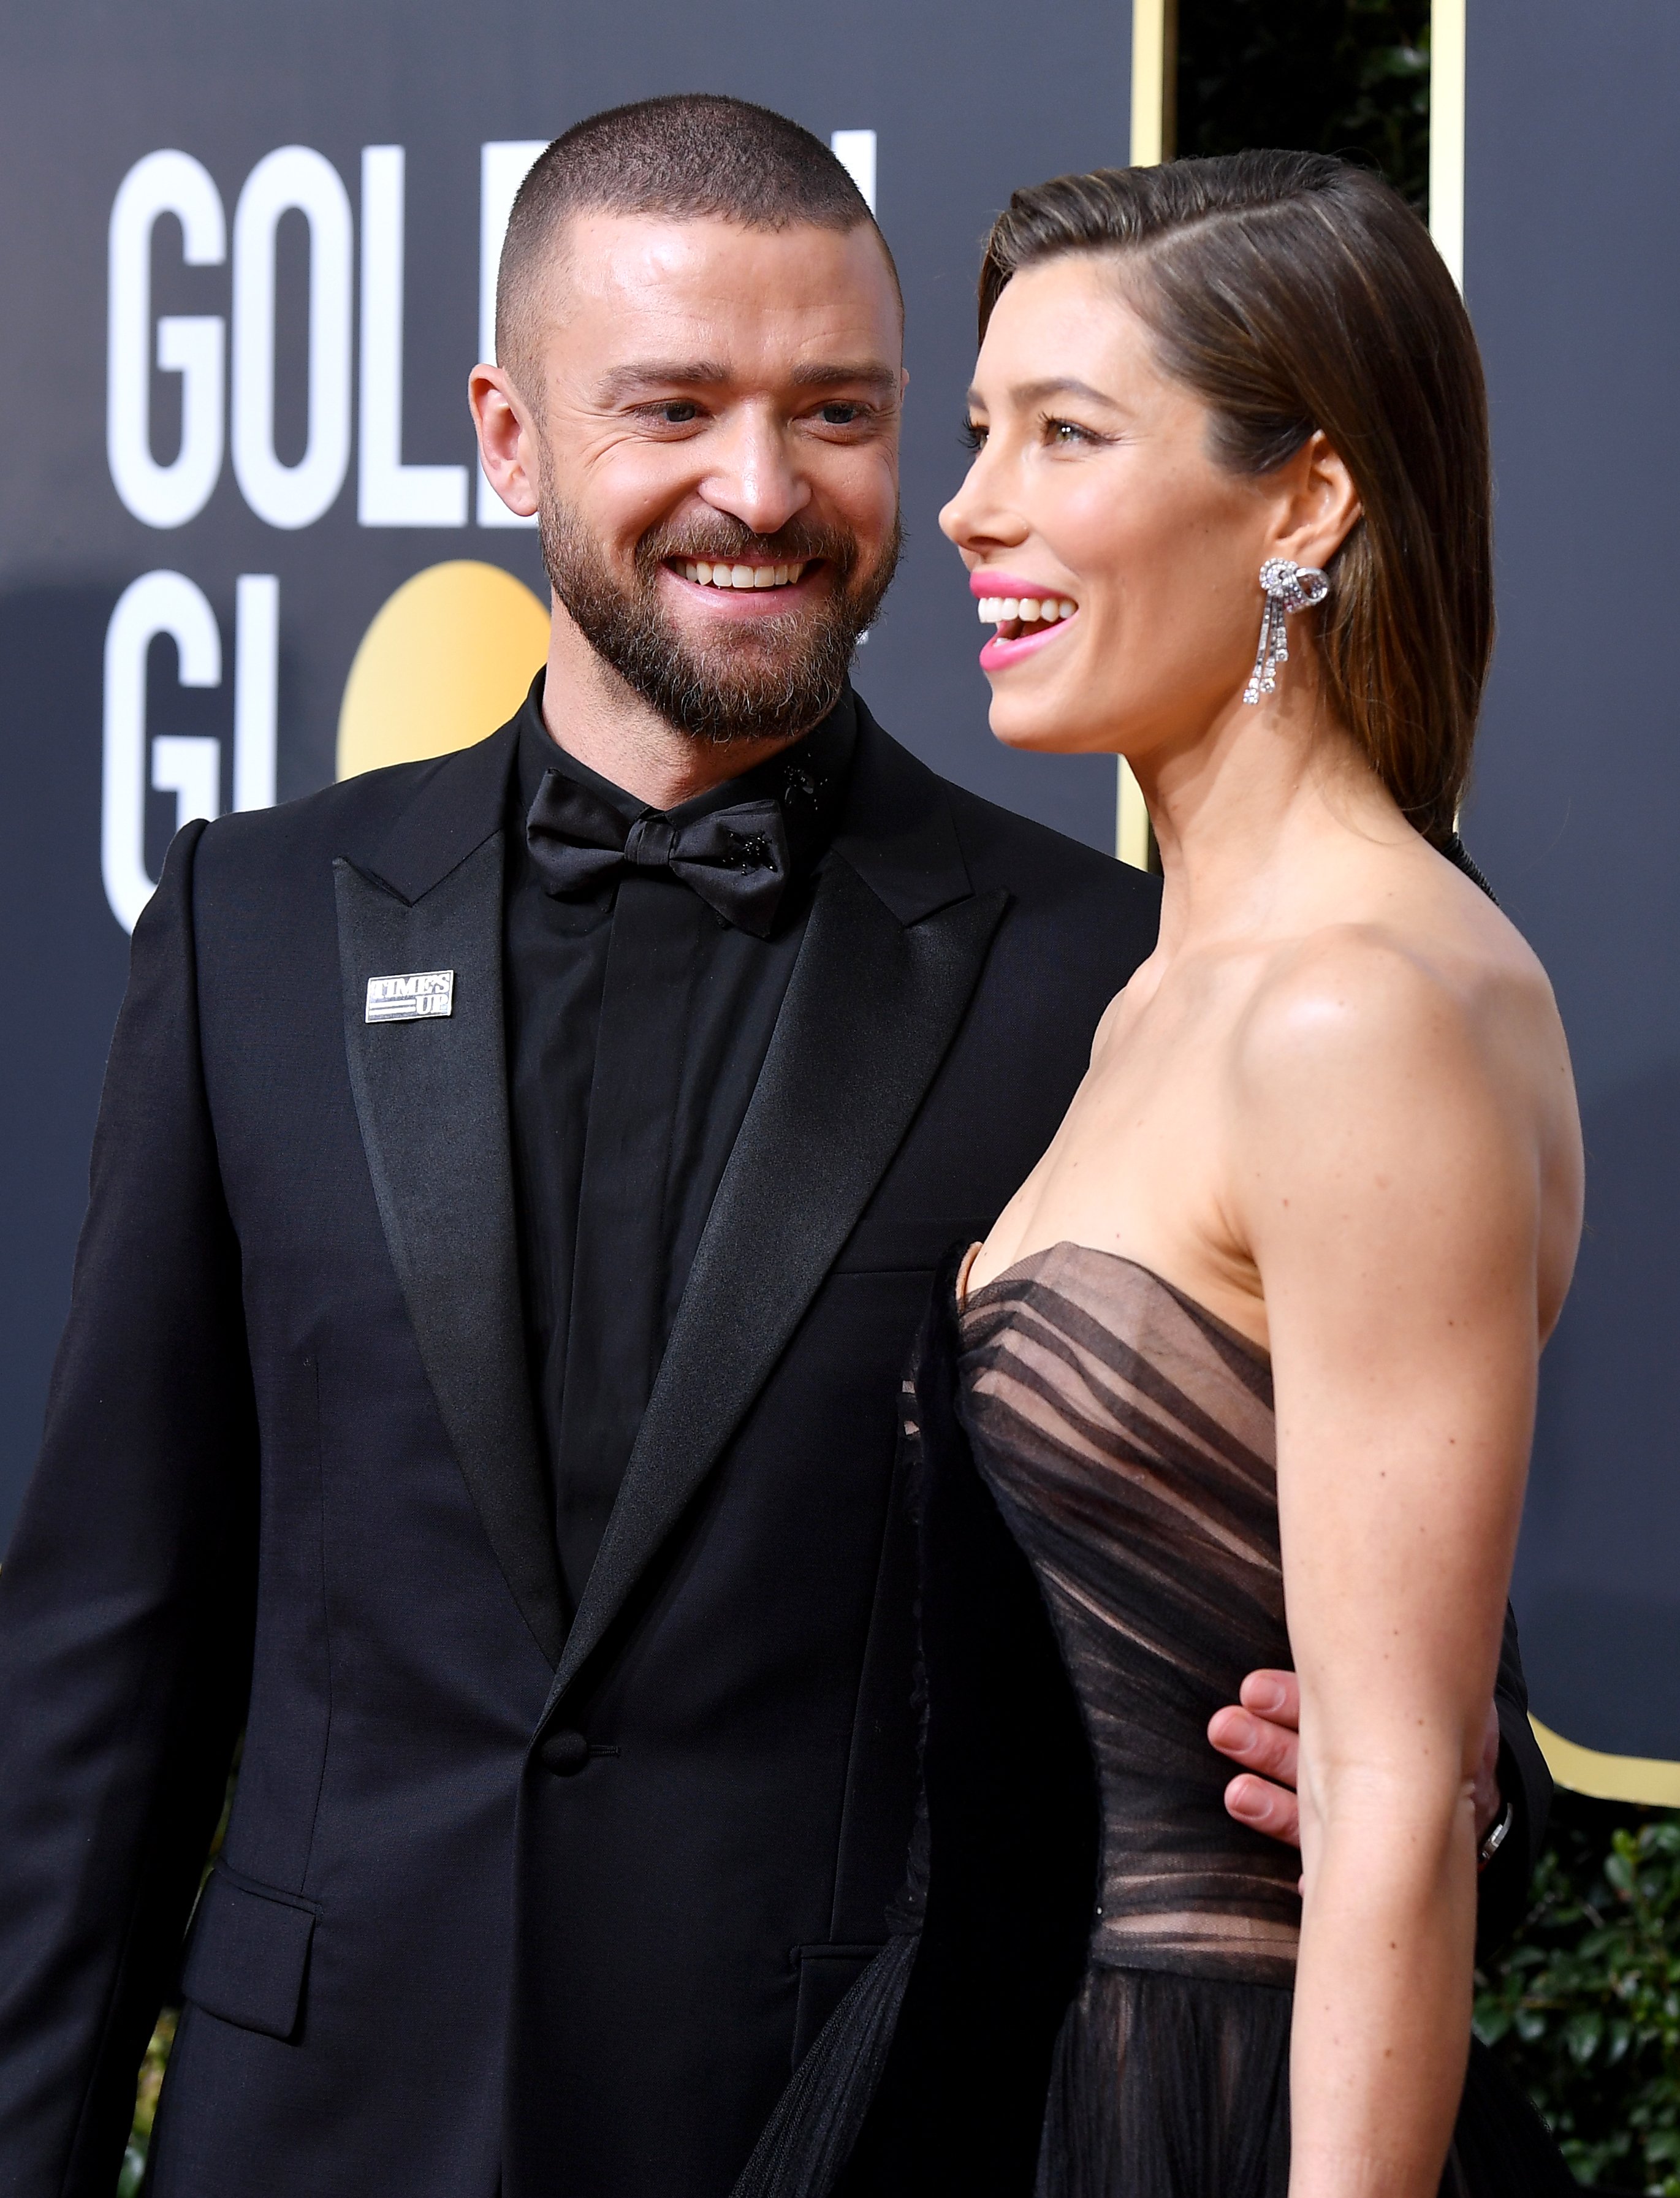 Jessica Biel and Justin Timberlake pictured at The 75th Golden Globe Awards, 2018, California. | Photo: Getty Images